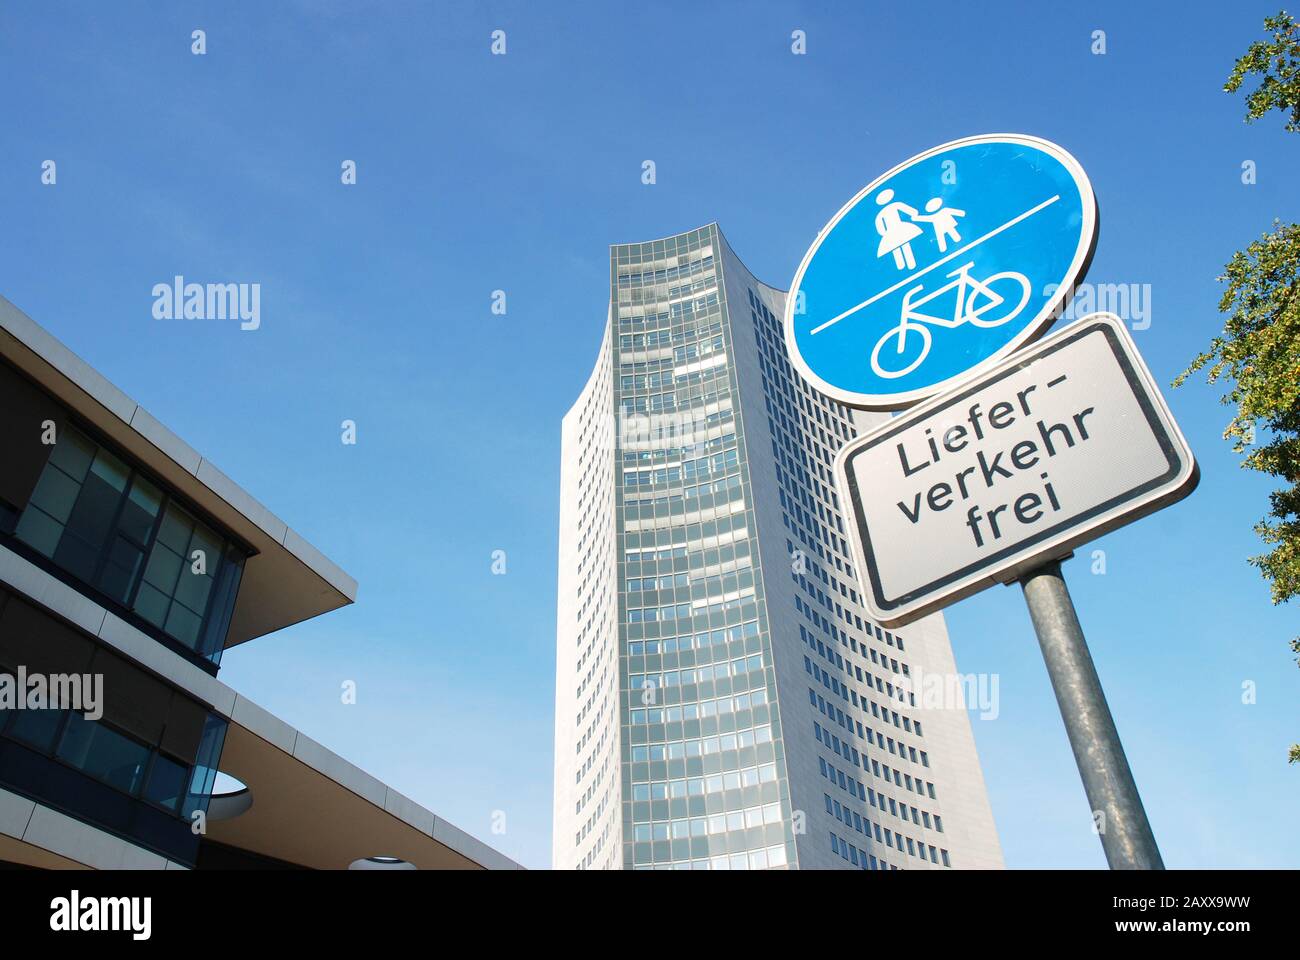 Traffic concept in the town innercity buidlings and road sign only for pedestrian, bicycle and-delivery traffic in german Stock Photo